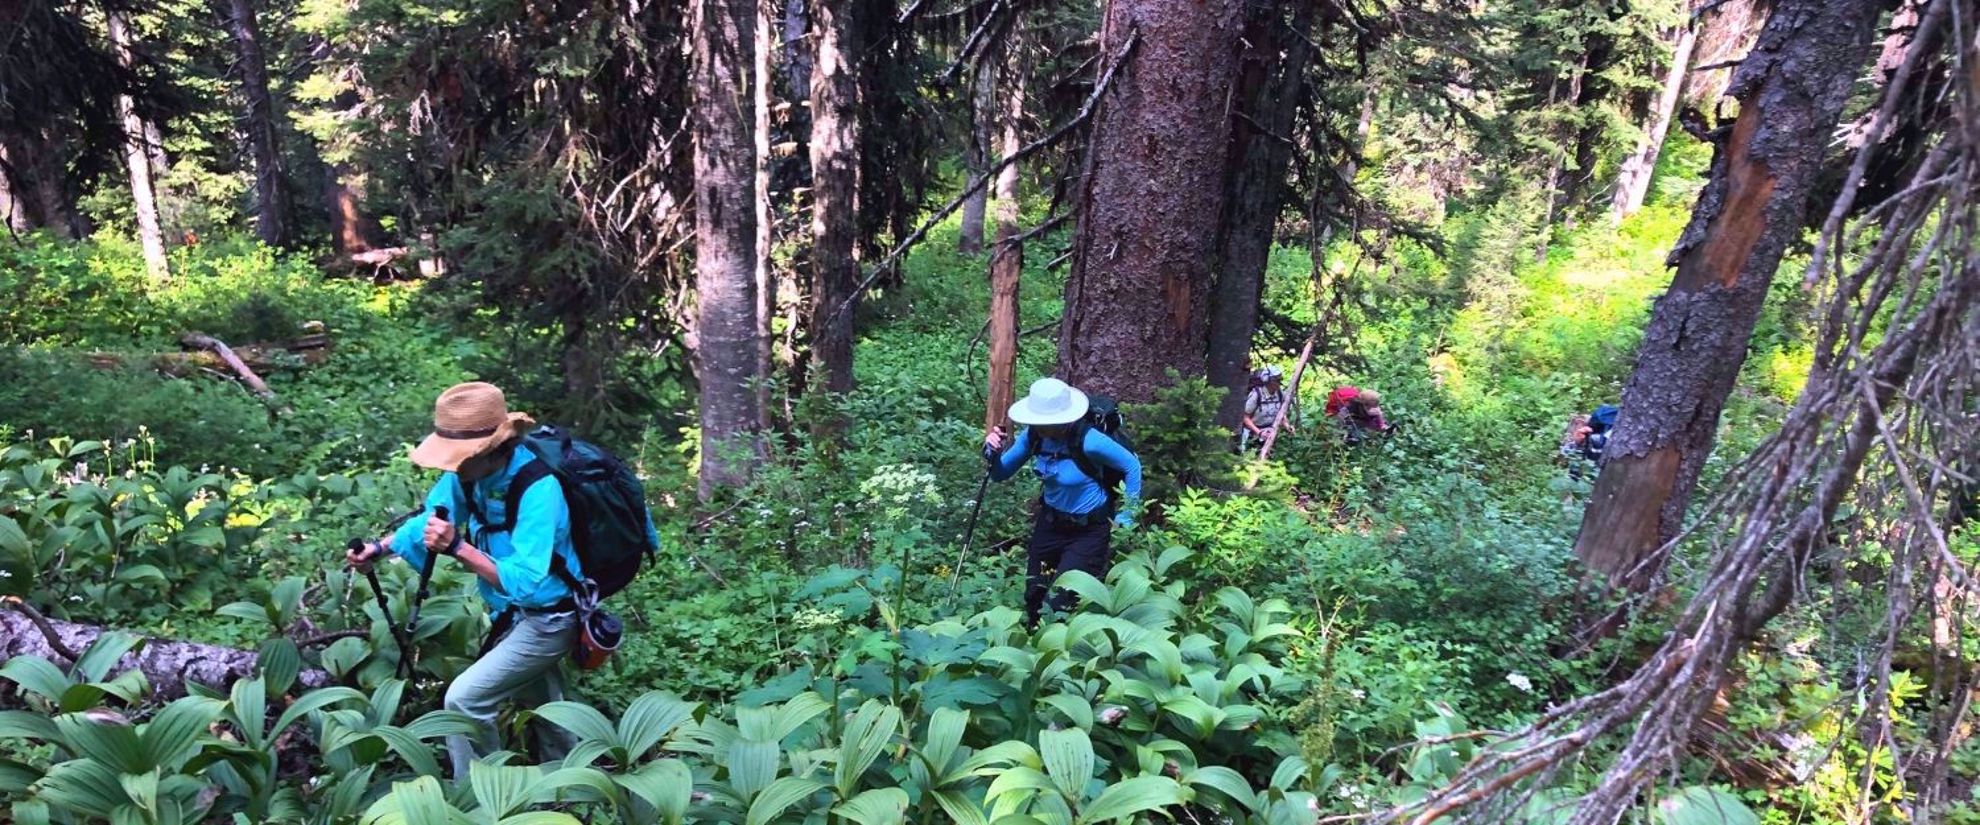 hiking the dense forests of the wells gray wilderness